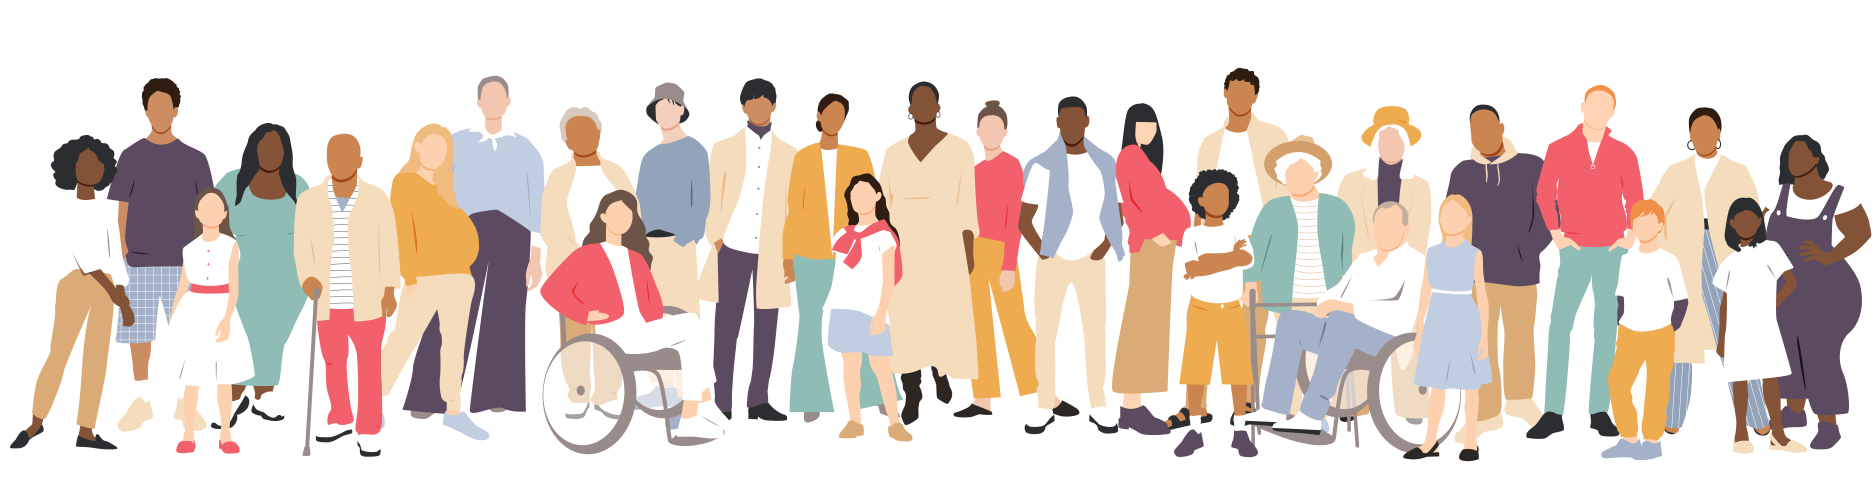 Animated image of a crowd of diverse people